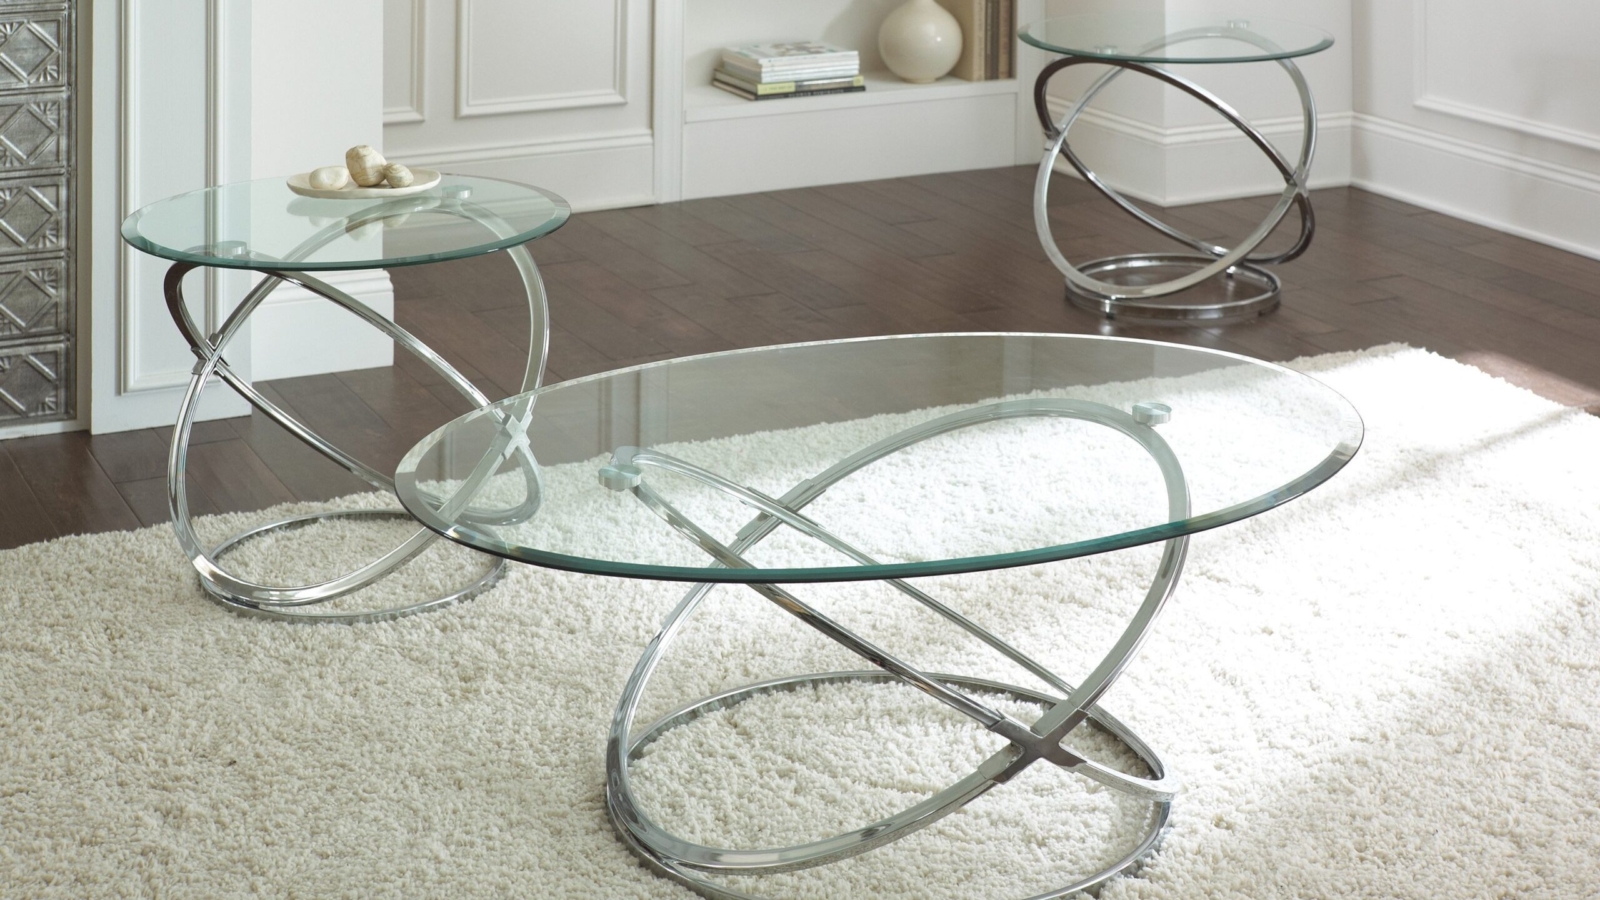 Silver Glass Living Room Furniture Silver Glass Living Room Furniture coffee table awesome glass and chrome coffee table designs 3200 X 2204 - Living Room Decor